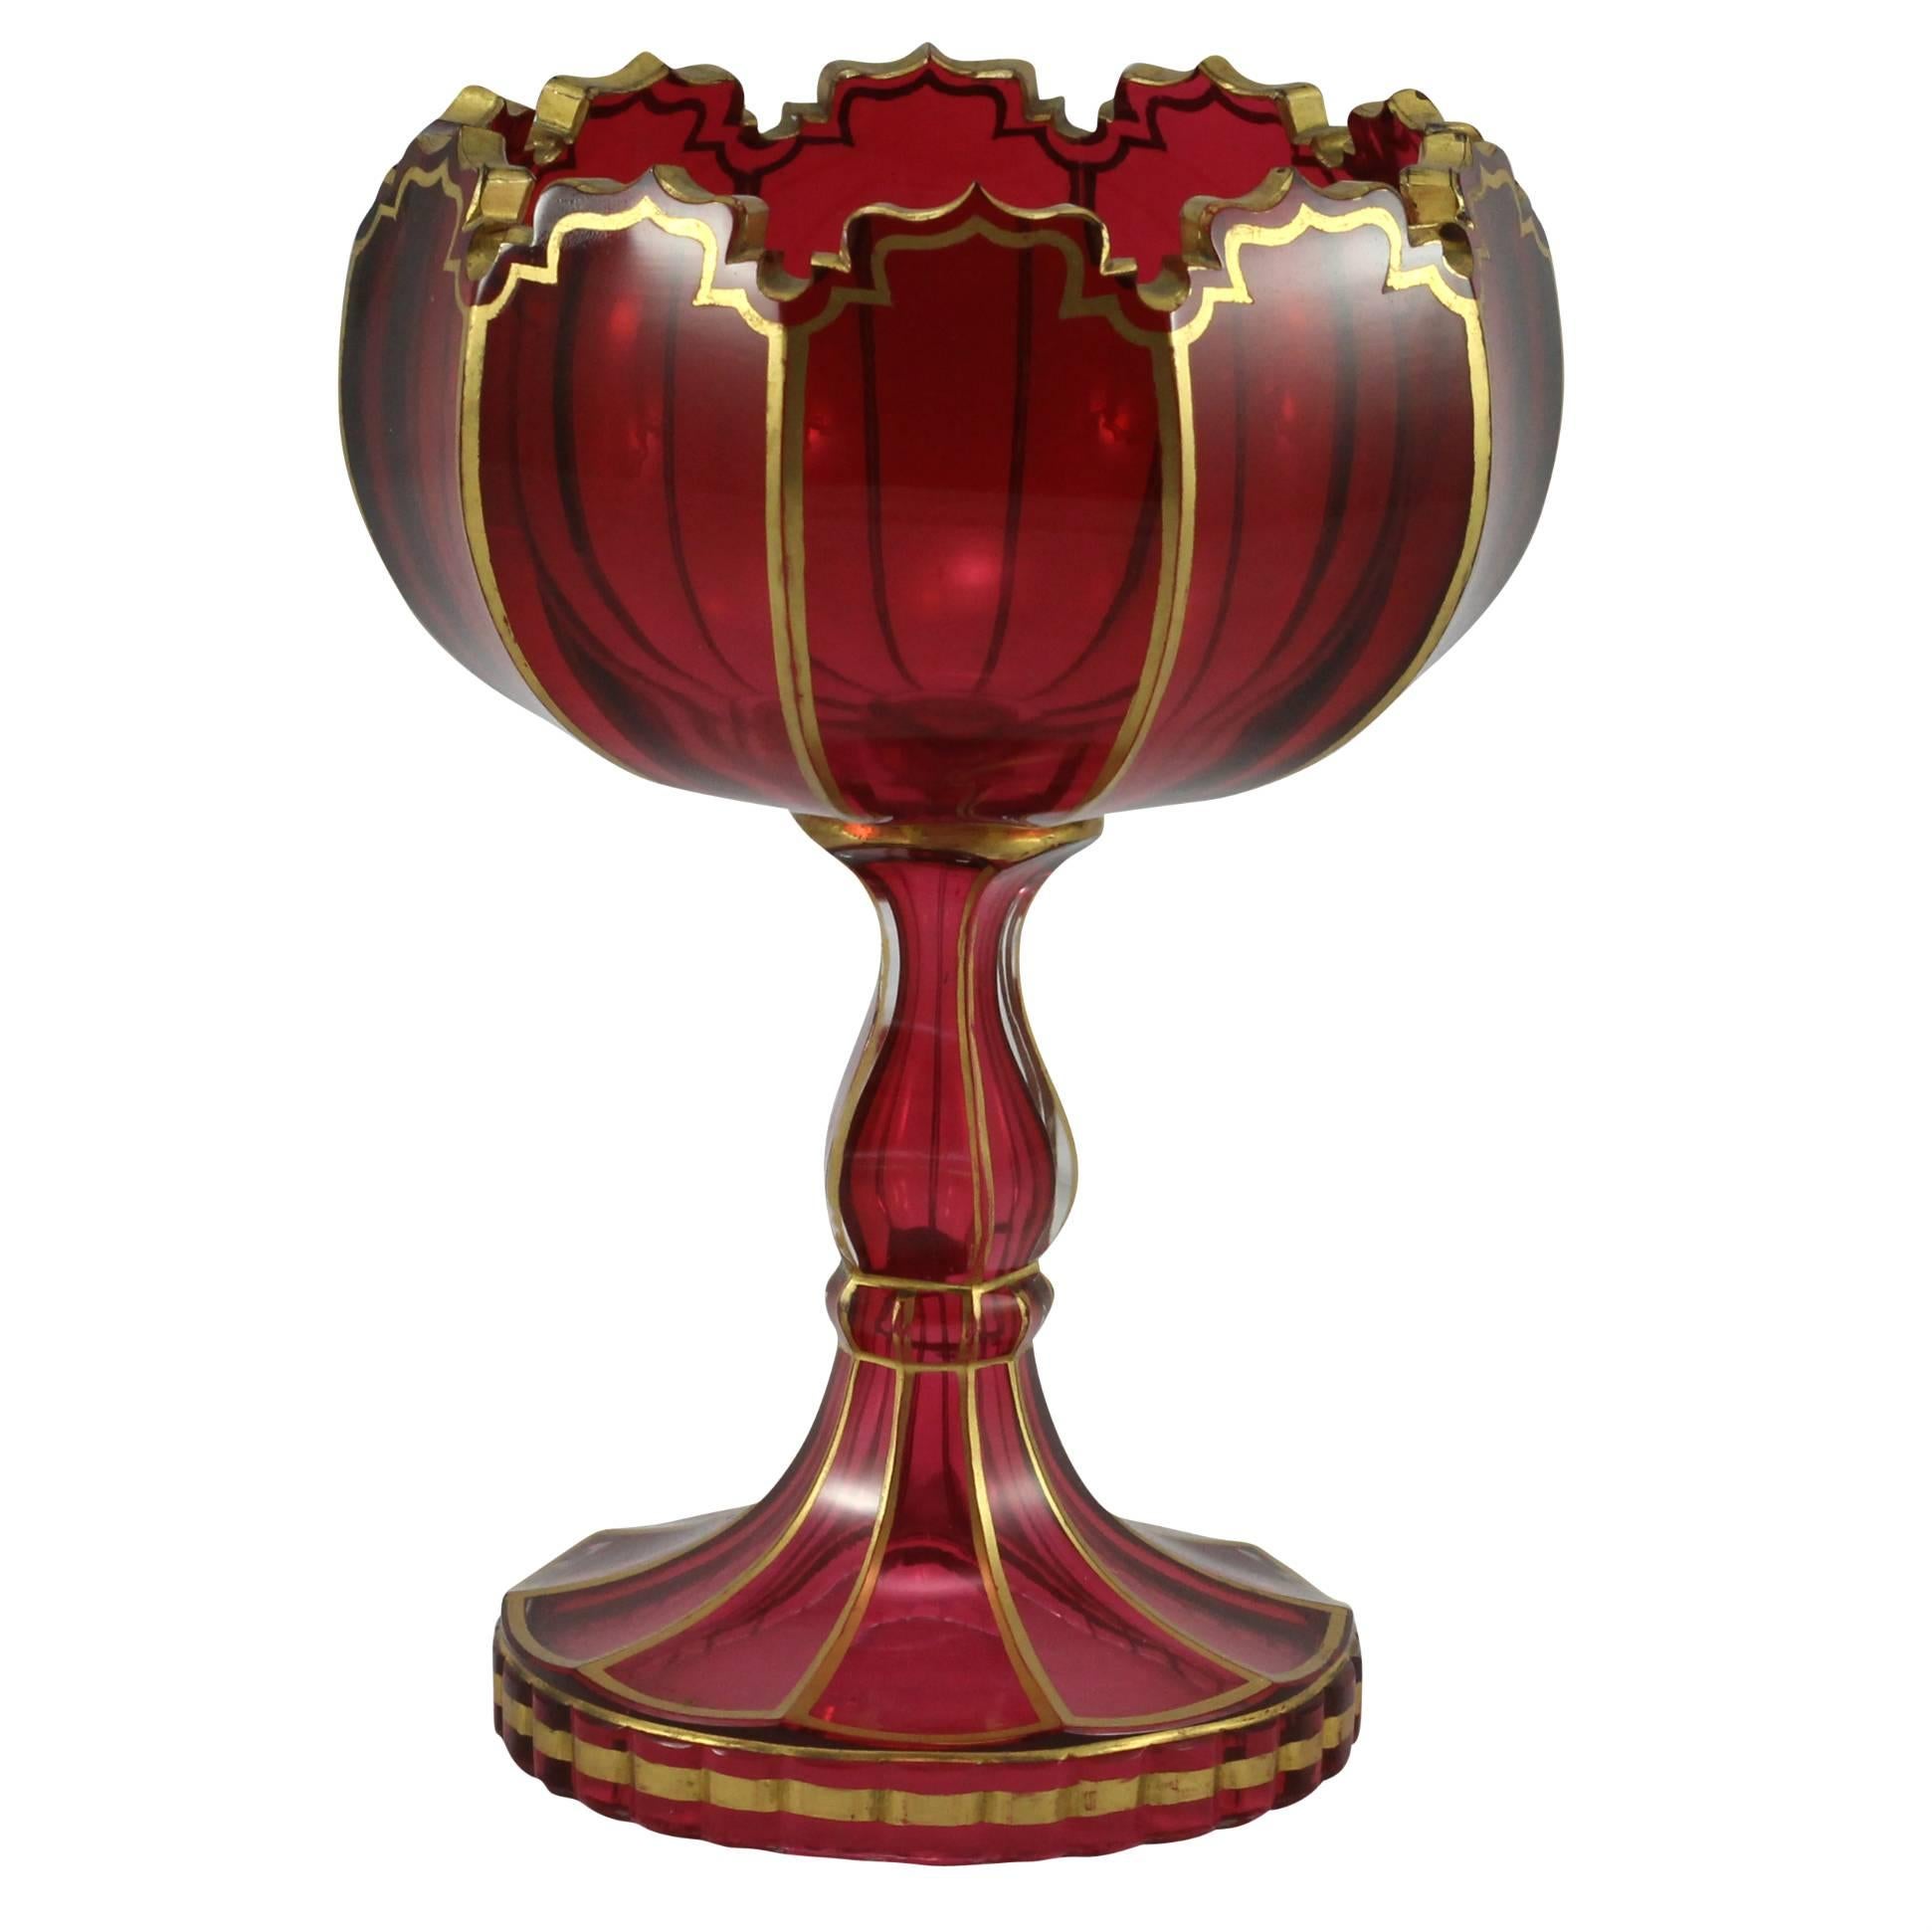 Richly blown in ruby glass, with gold gilt accents, this tazza leans heavily towards a Russian design influence.